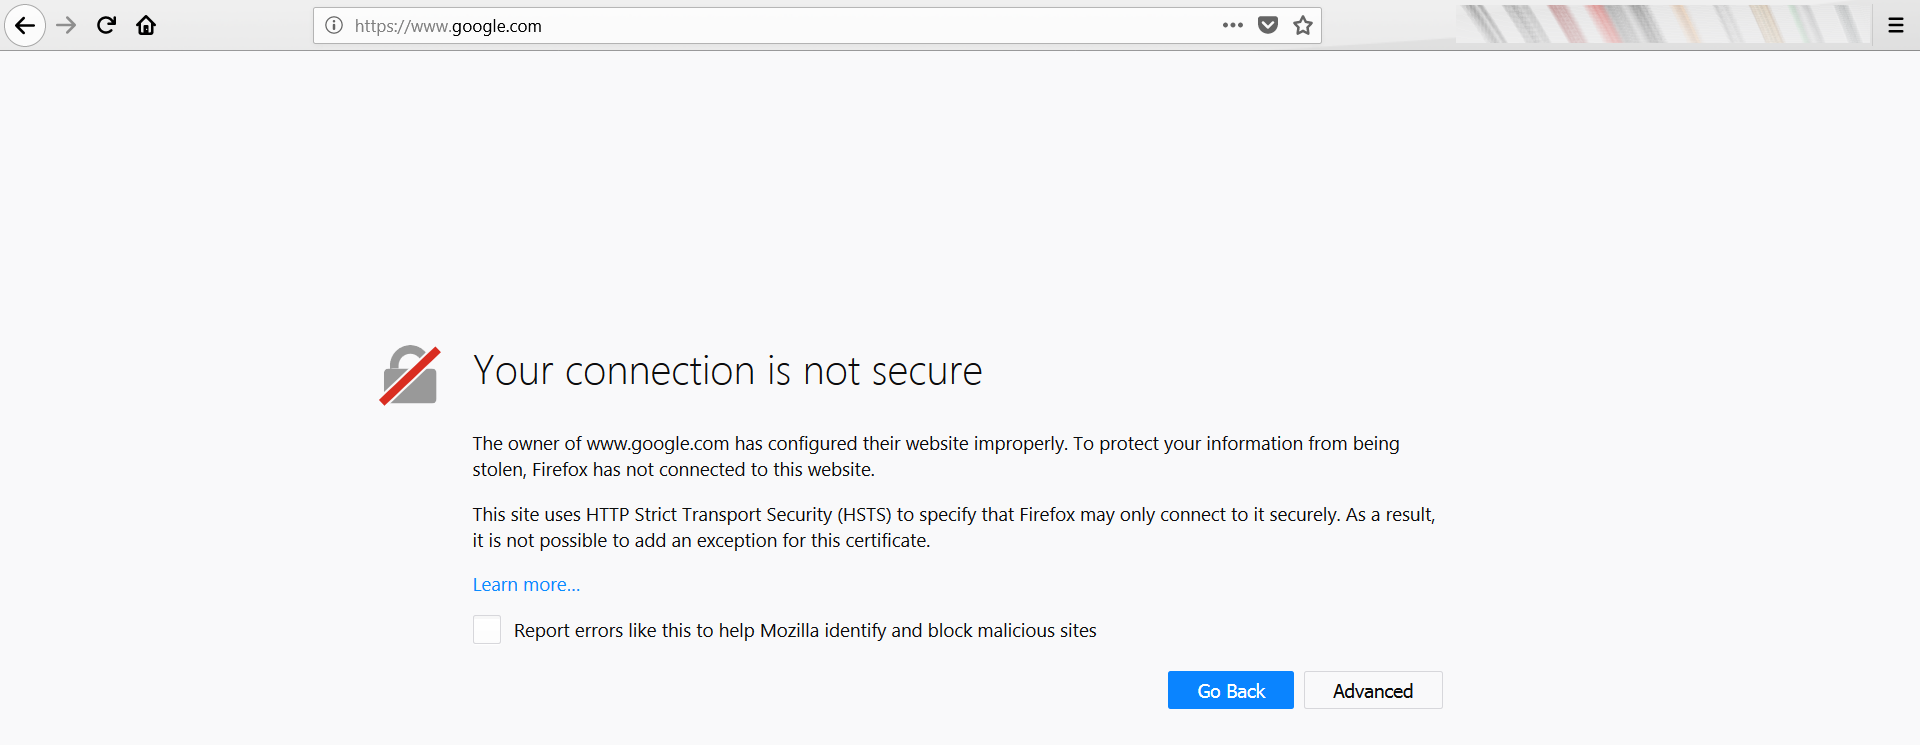 Firefox warning - Your connection is not secure